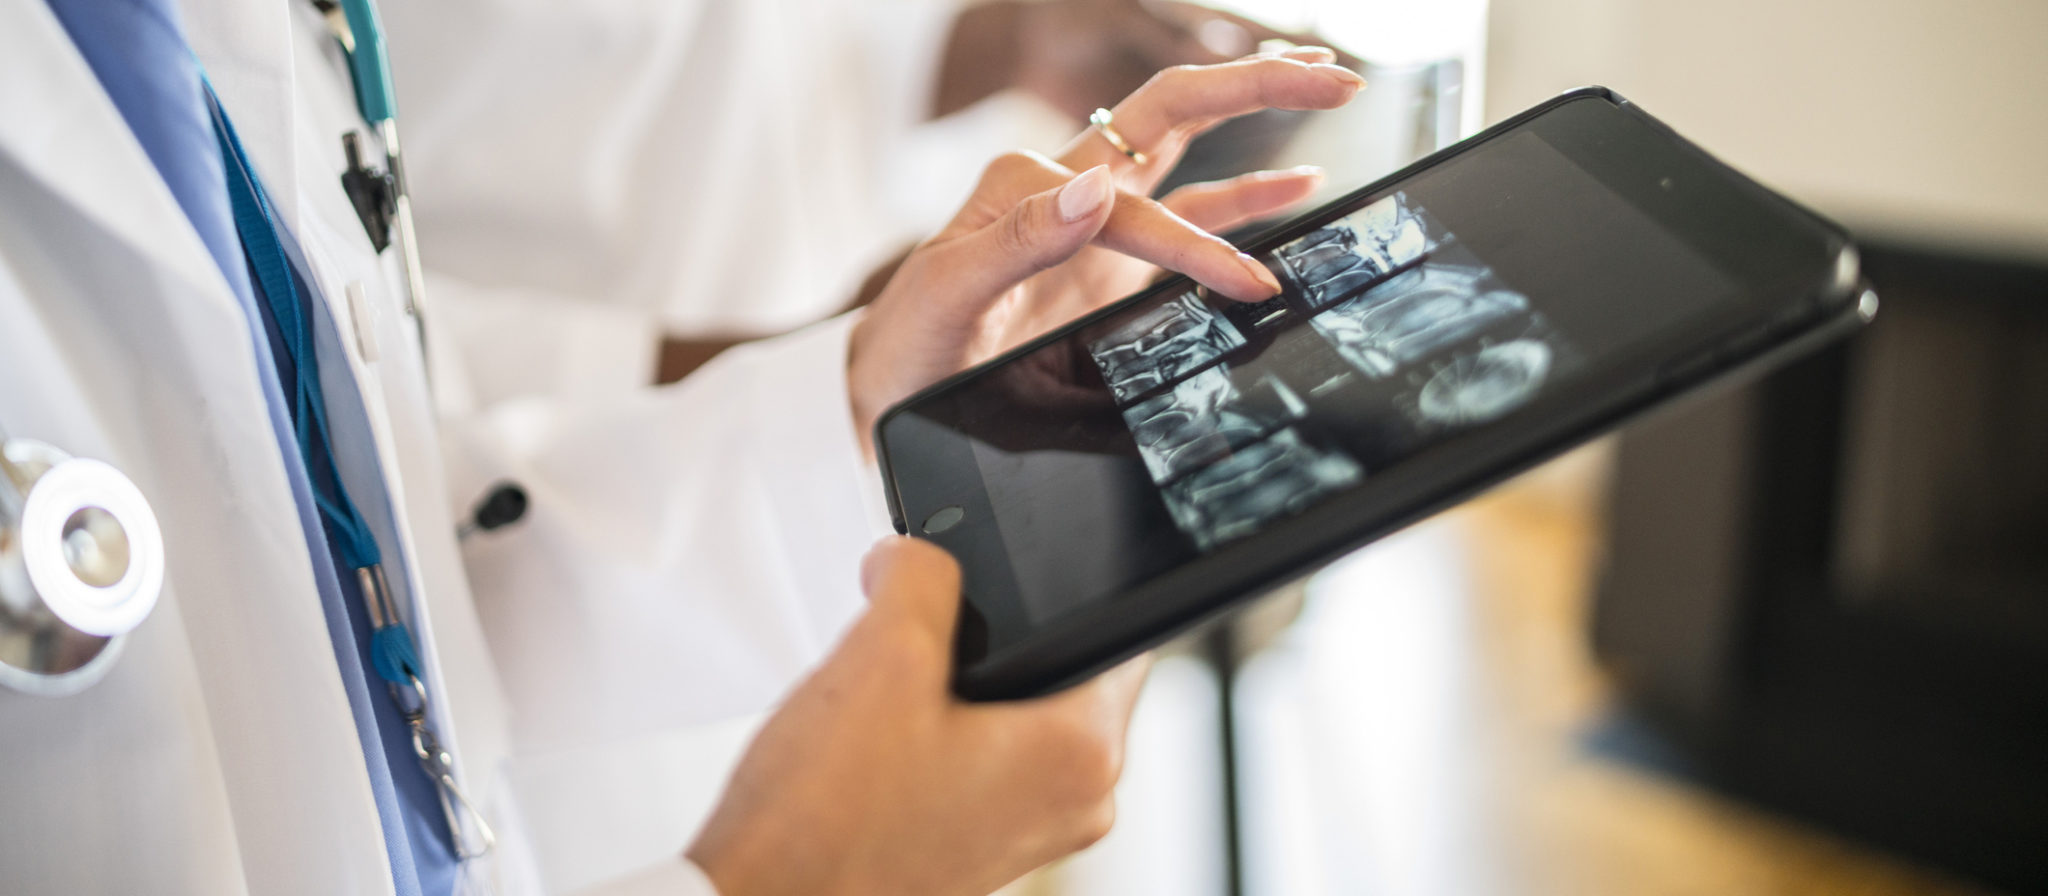 Doctors working with Digital Tablet